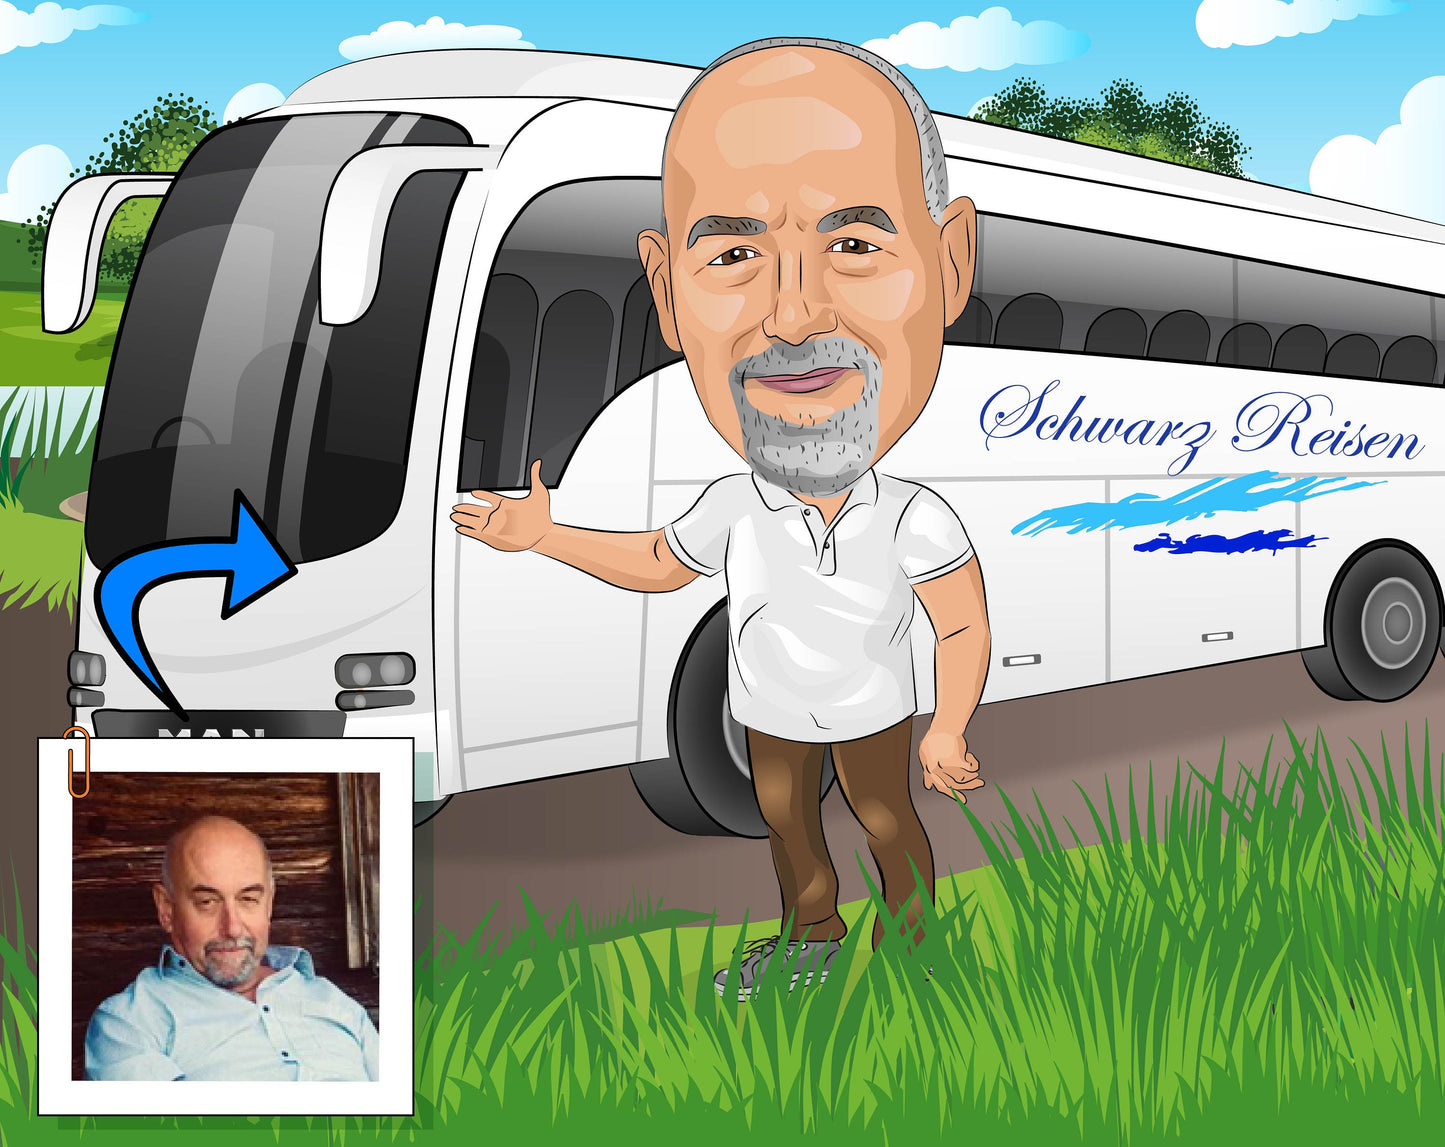 Dry Cleaner Gift - Custom Caricature Portrait From Your Photo/Dry Cleaning